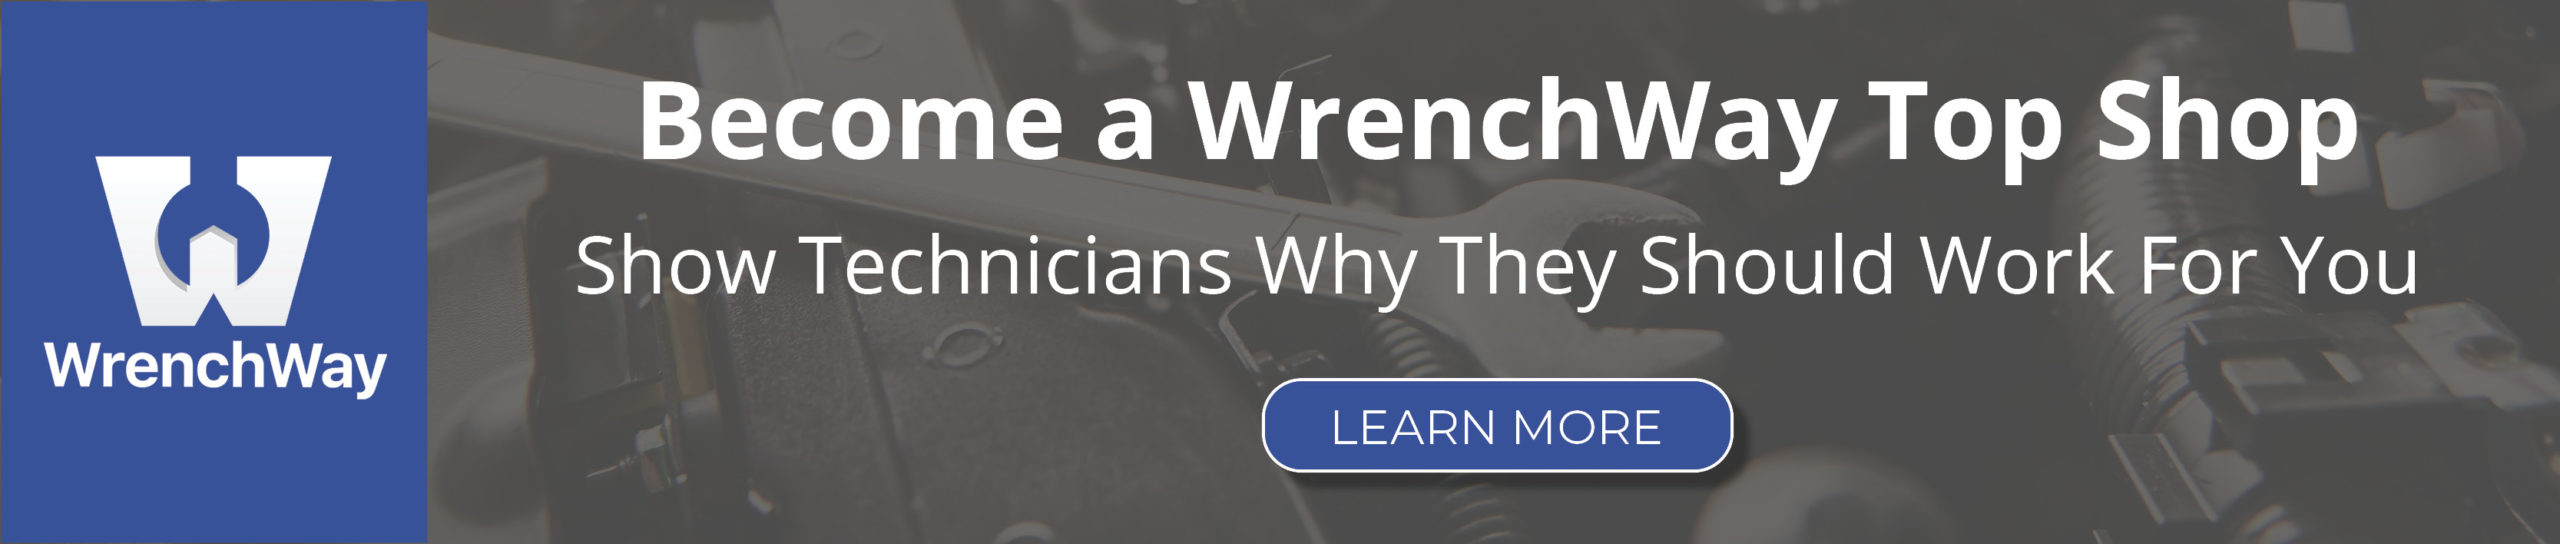 Become a WrenchWay Top Shop to show technicians why they should work for your shop or dealership. Click here to learn more.